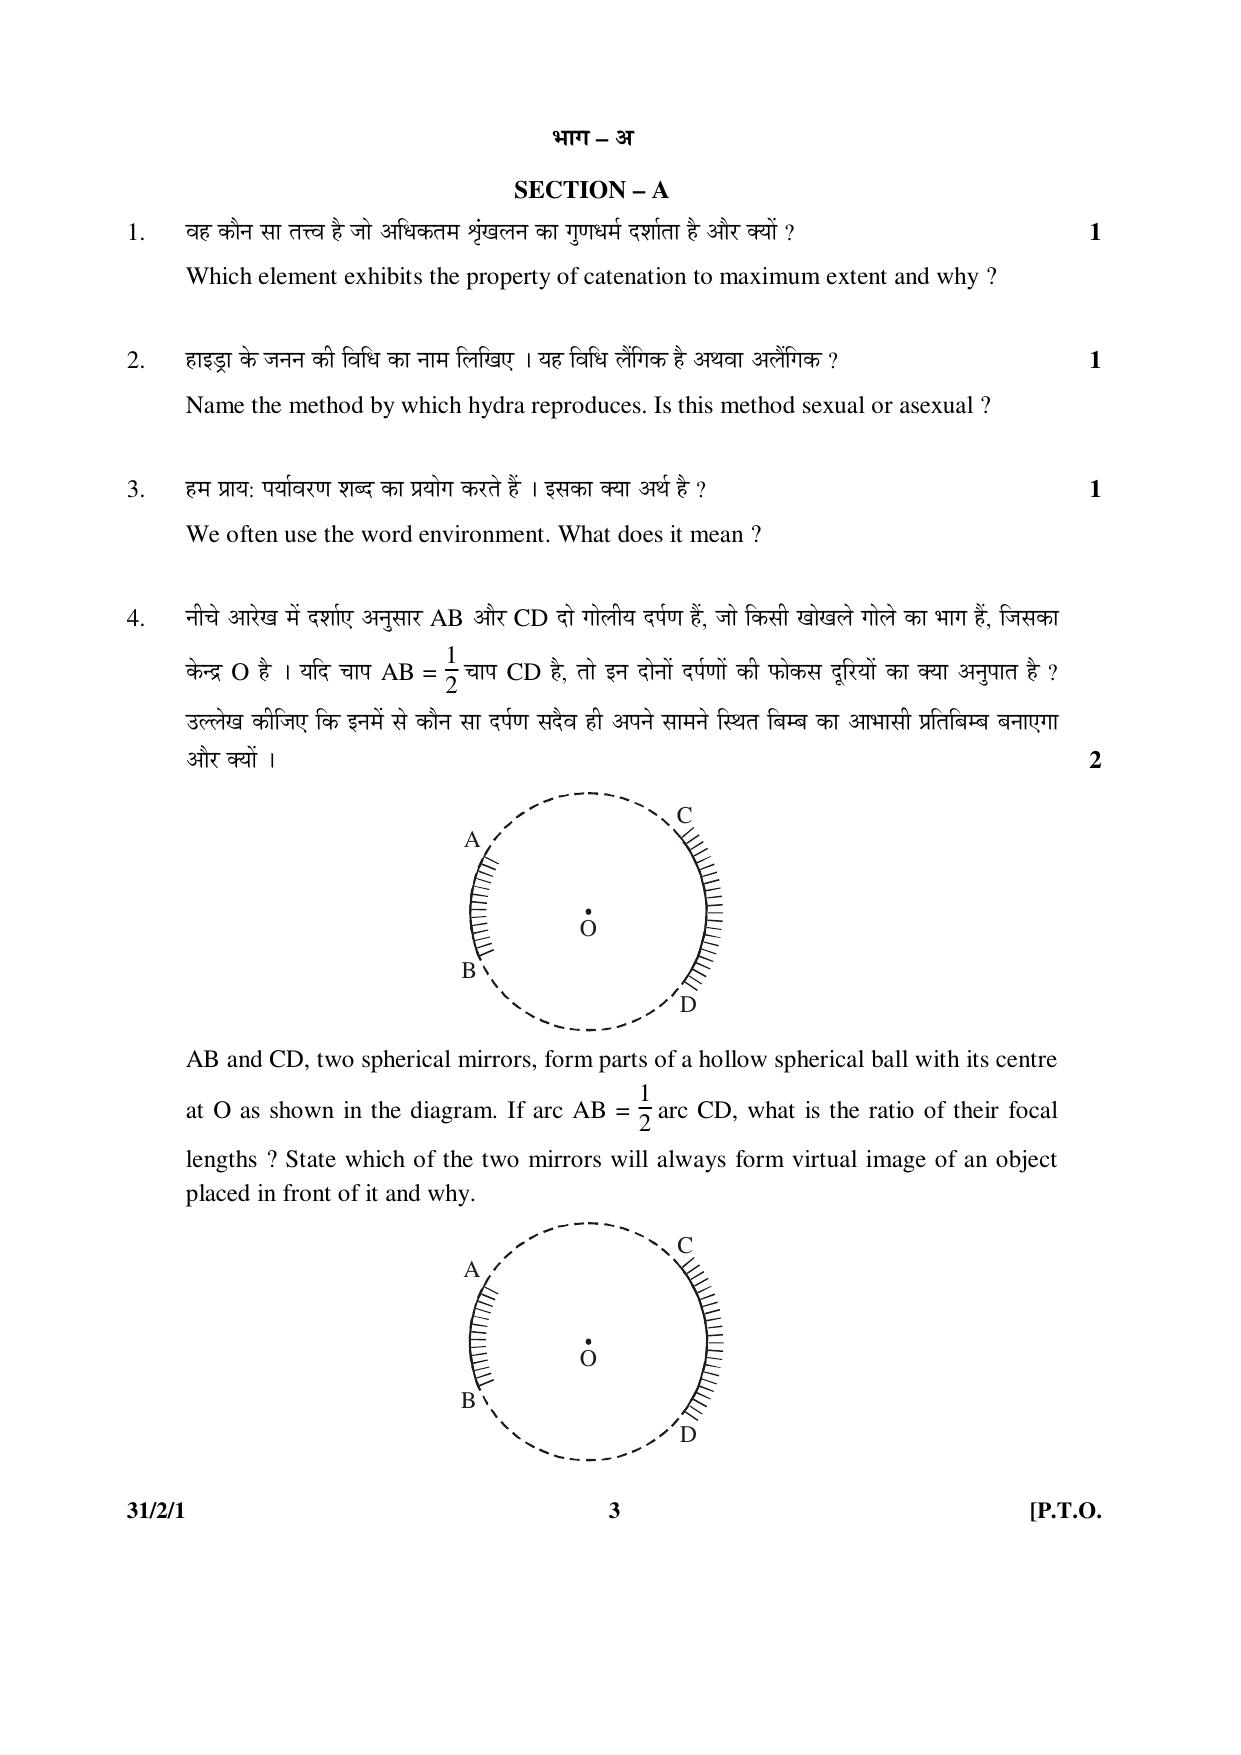 CBSE Class 10 31-2-1 _Science 2016 Question Paper - Page 3